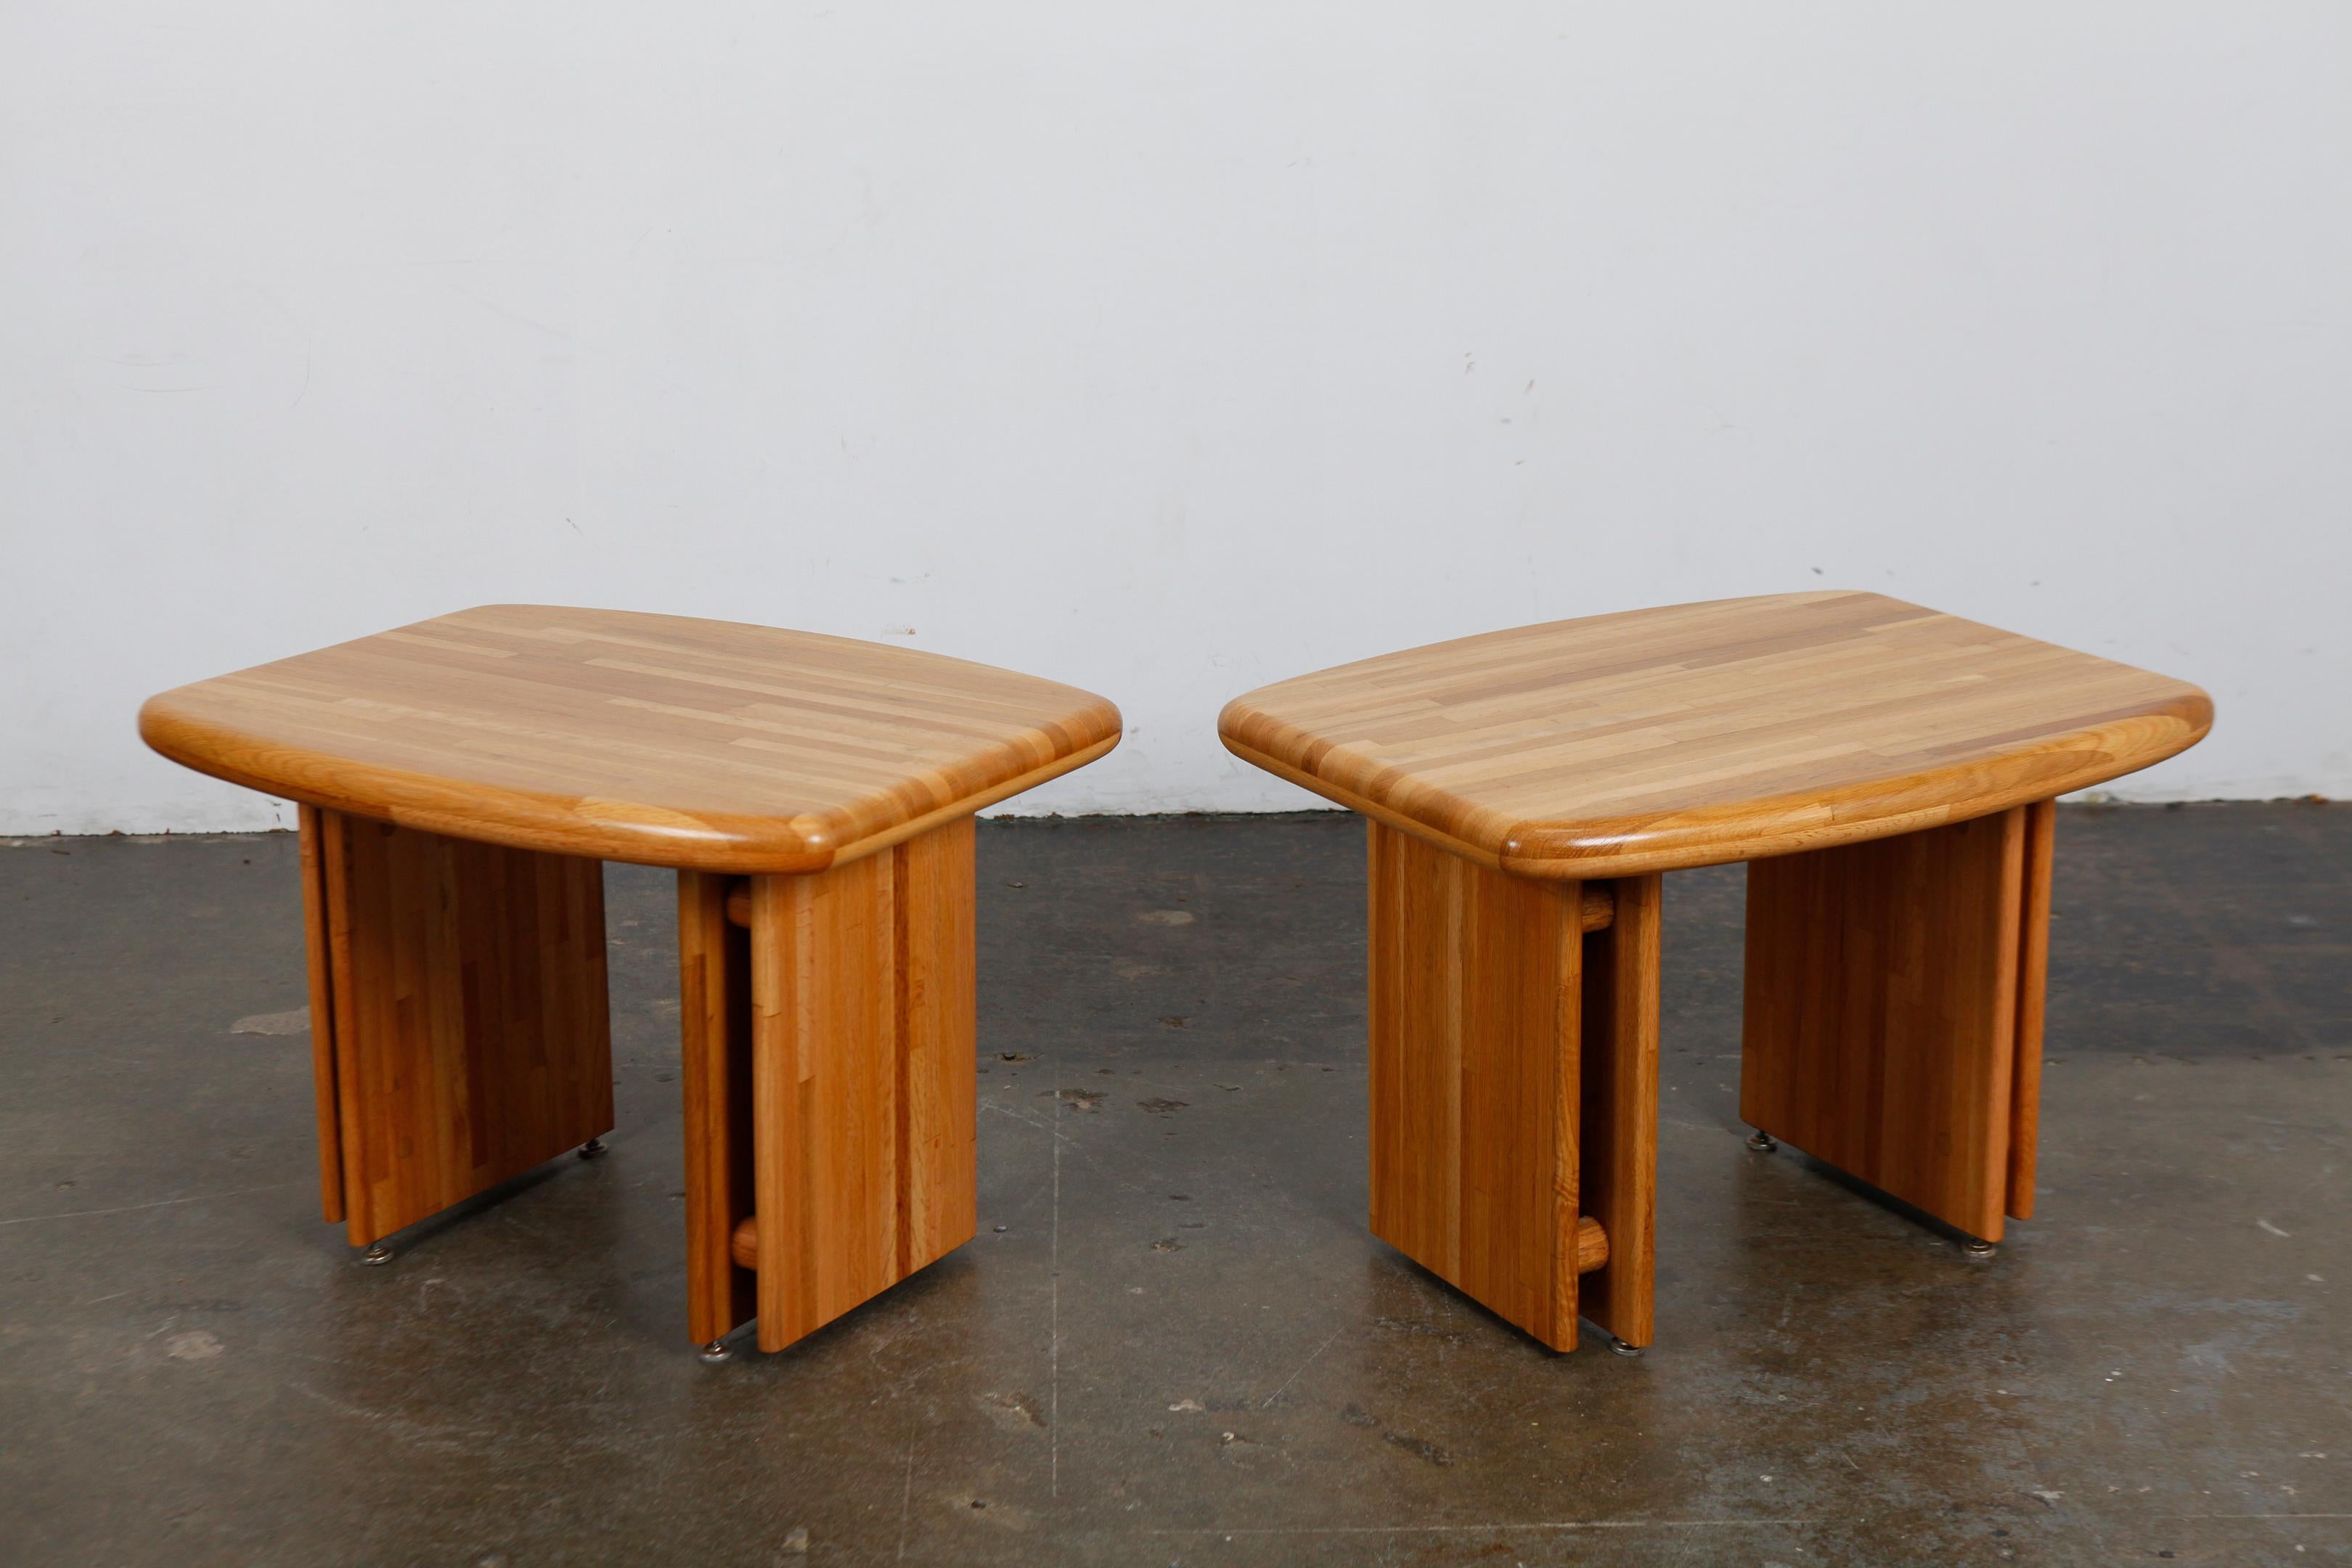 Pair of solid oak trestle leg end tables with a surfboard shaped top, attributed to Lou Hodges, USA, 1970s. Newly refinished in matte lacquer.